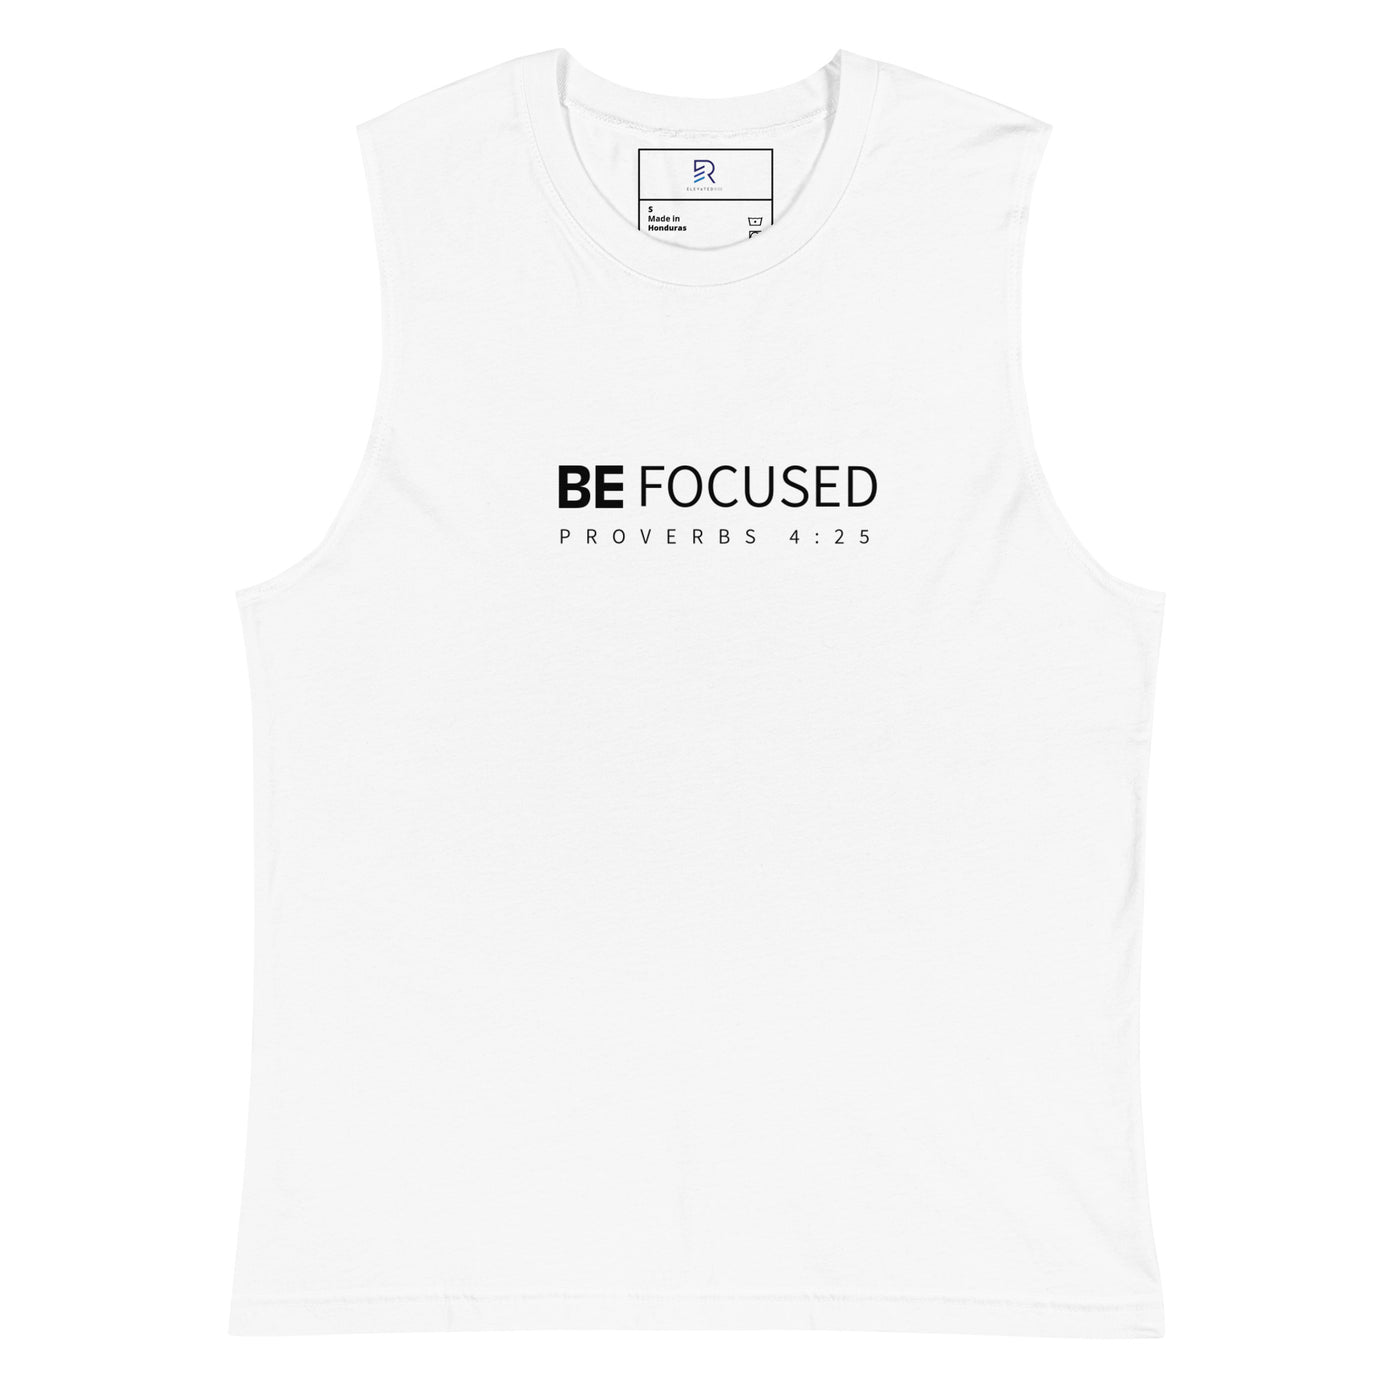 Men's White Muscle Shirt - Be Focused Proverbs 4:25